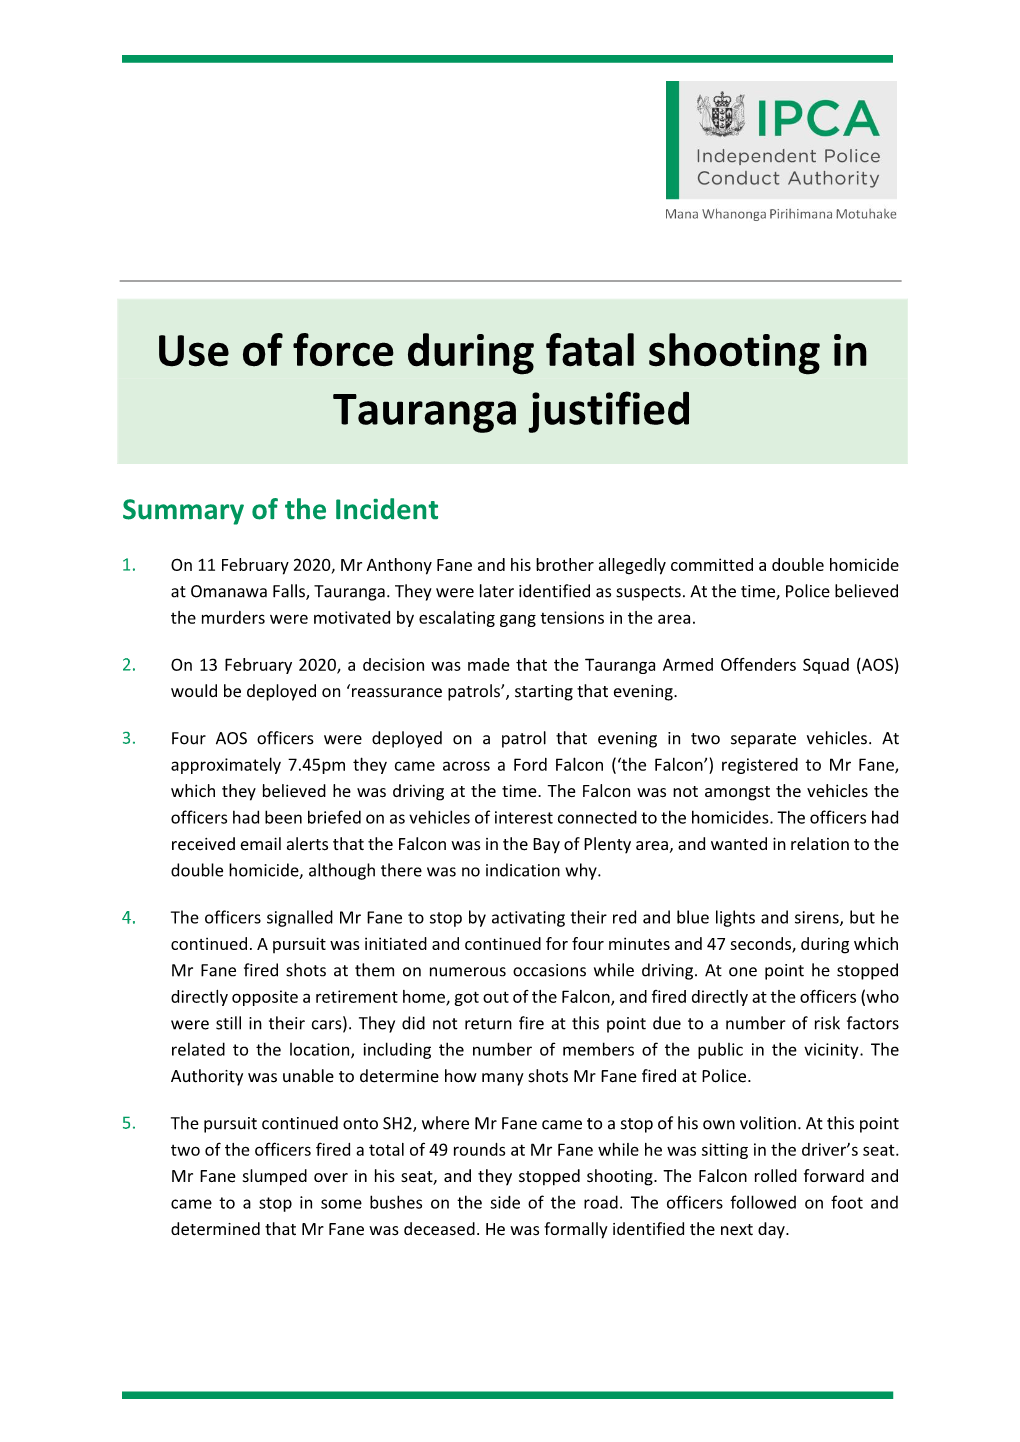 Use of Force During Fatal Shooting in Tauranga Justified